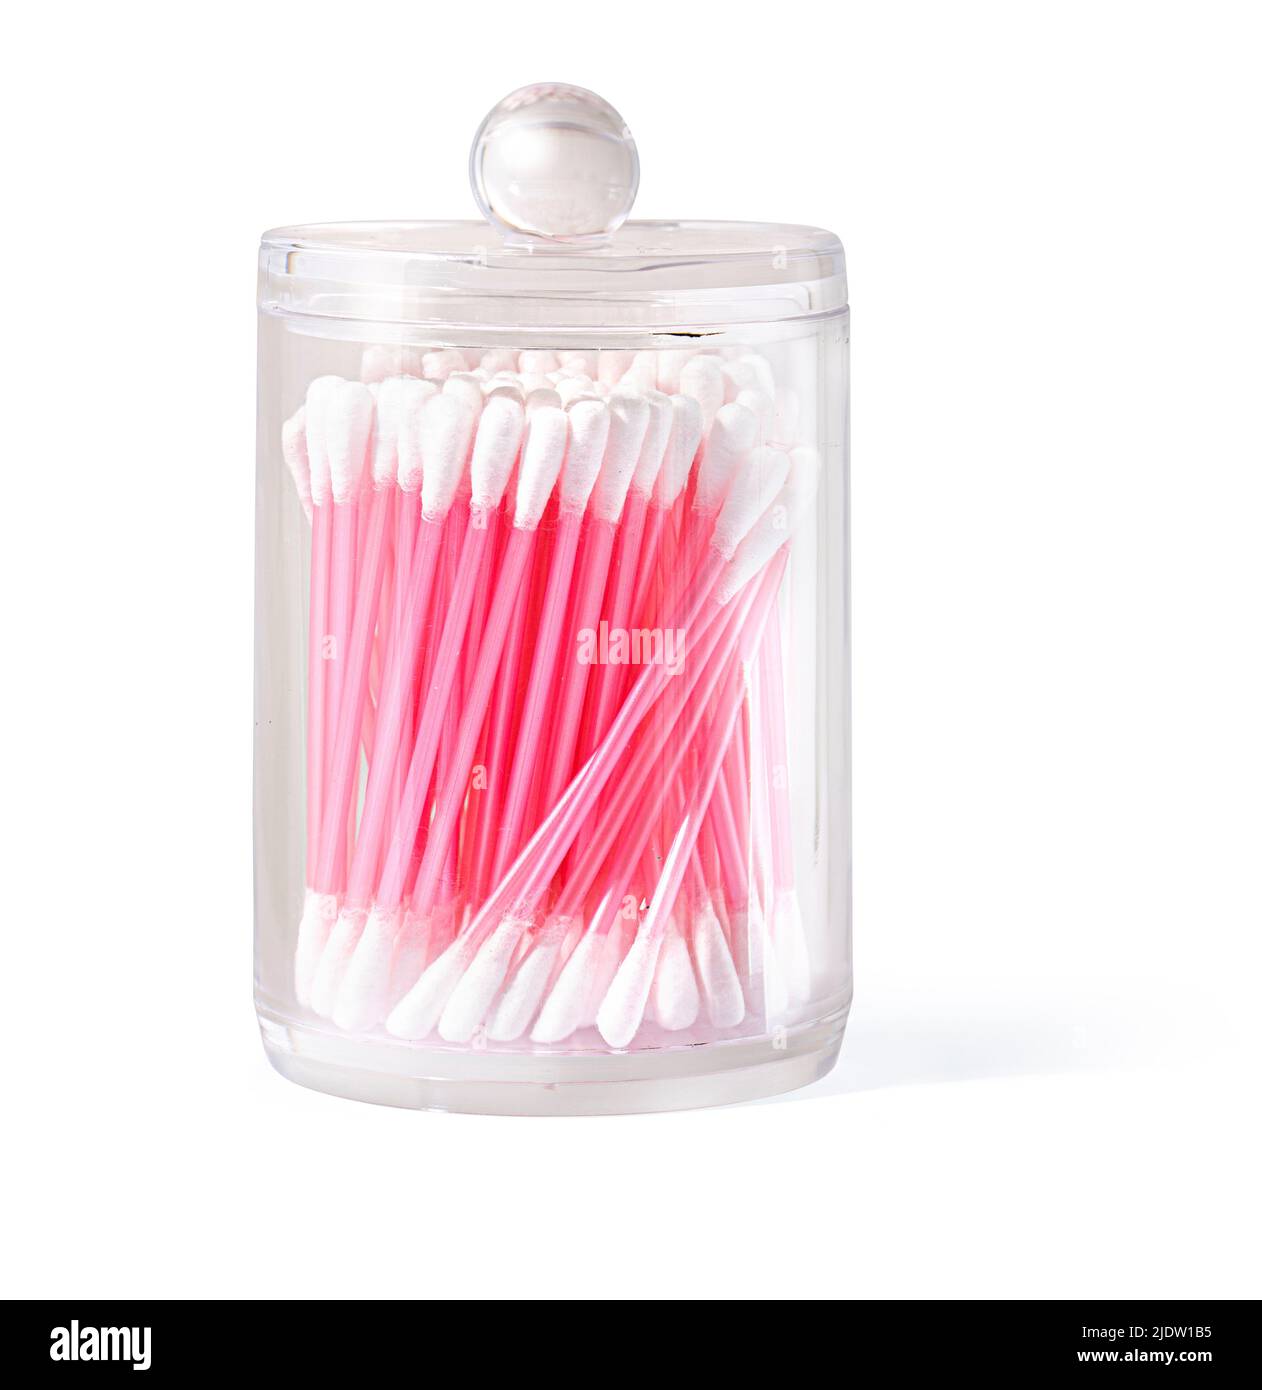 Cotton swabs in transparent plastic box. Isolated on a white. with clipping path Stock Photo